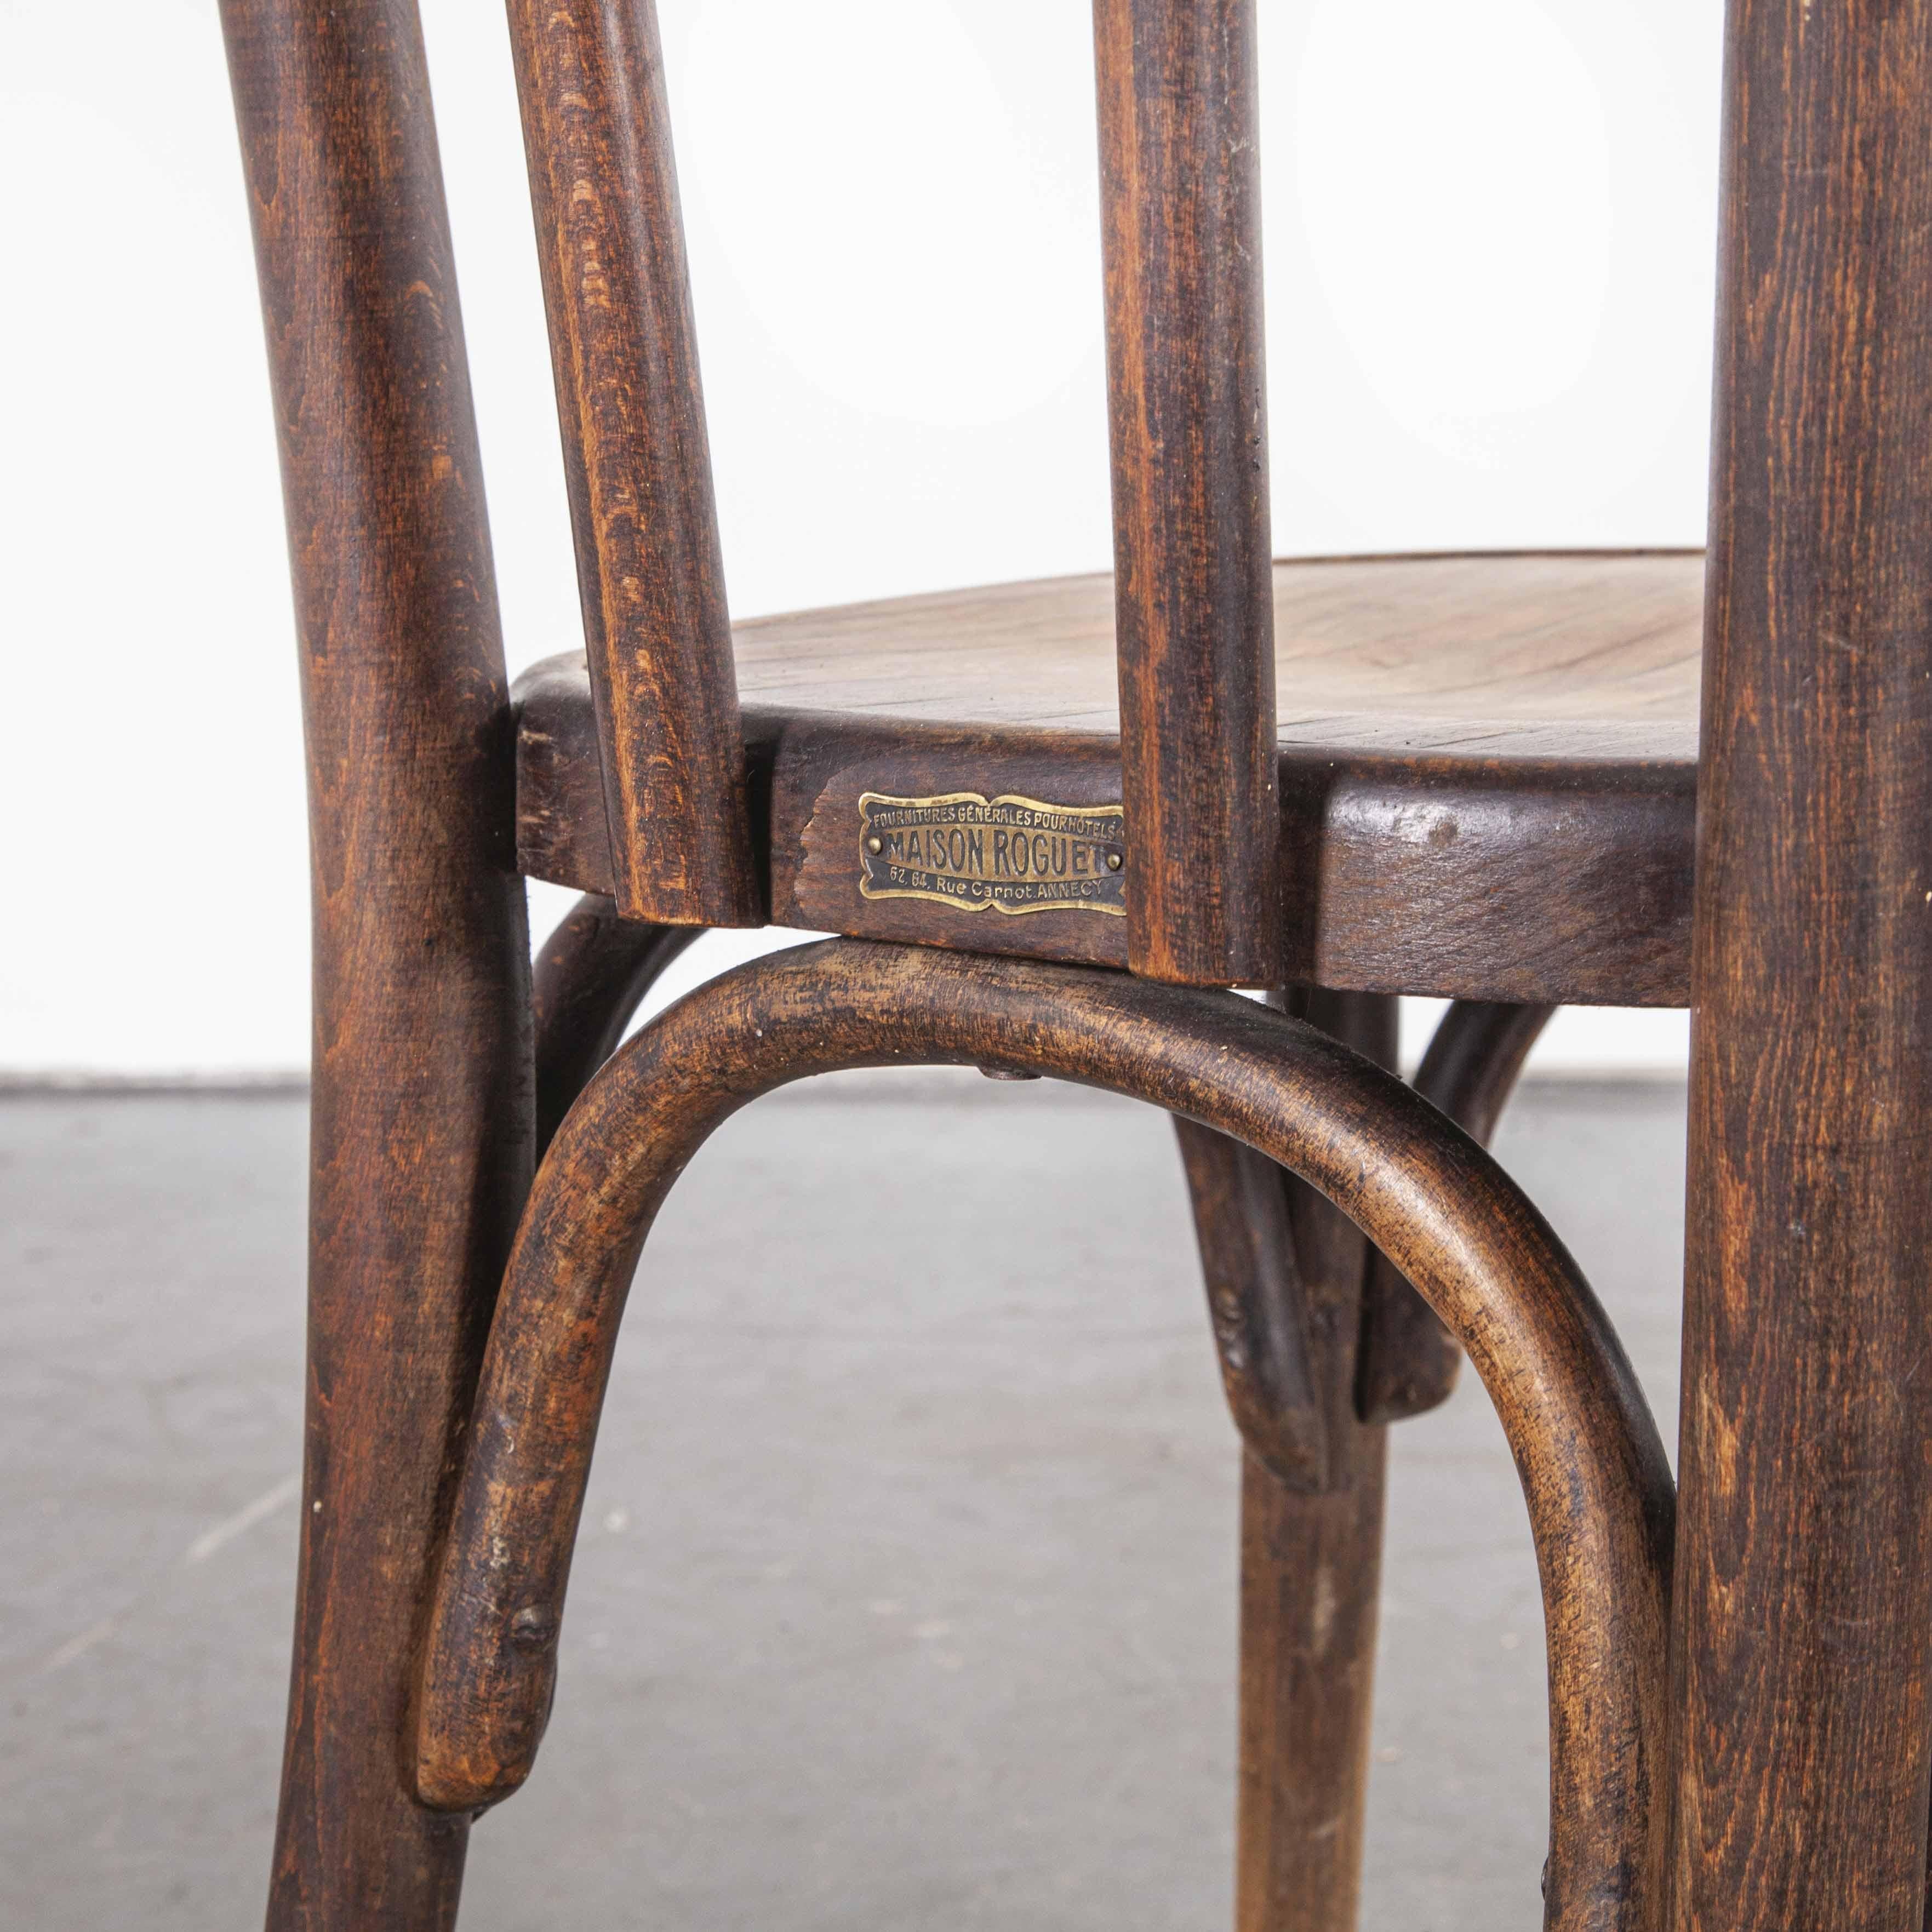 1920s Baumann bentwood bistro dining chair – Maison Rouget – set of eight. Classic beech bistro chair made in France by the maker Joamin Baumann. Baumann is a slightly off the radar French producer just starting to gain traction in the market.